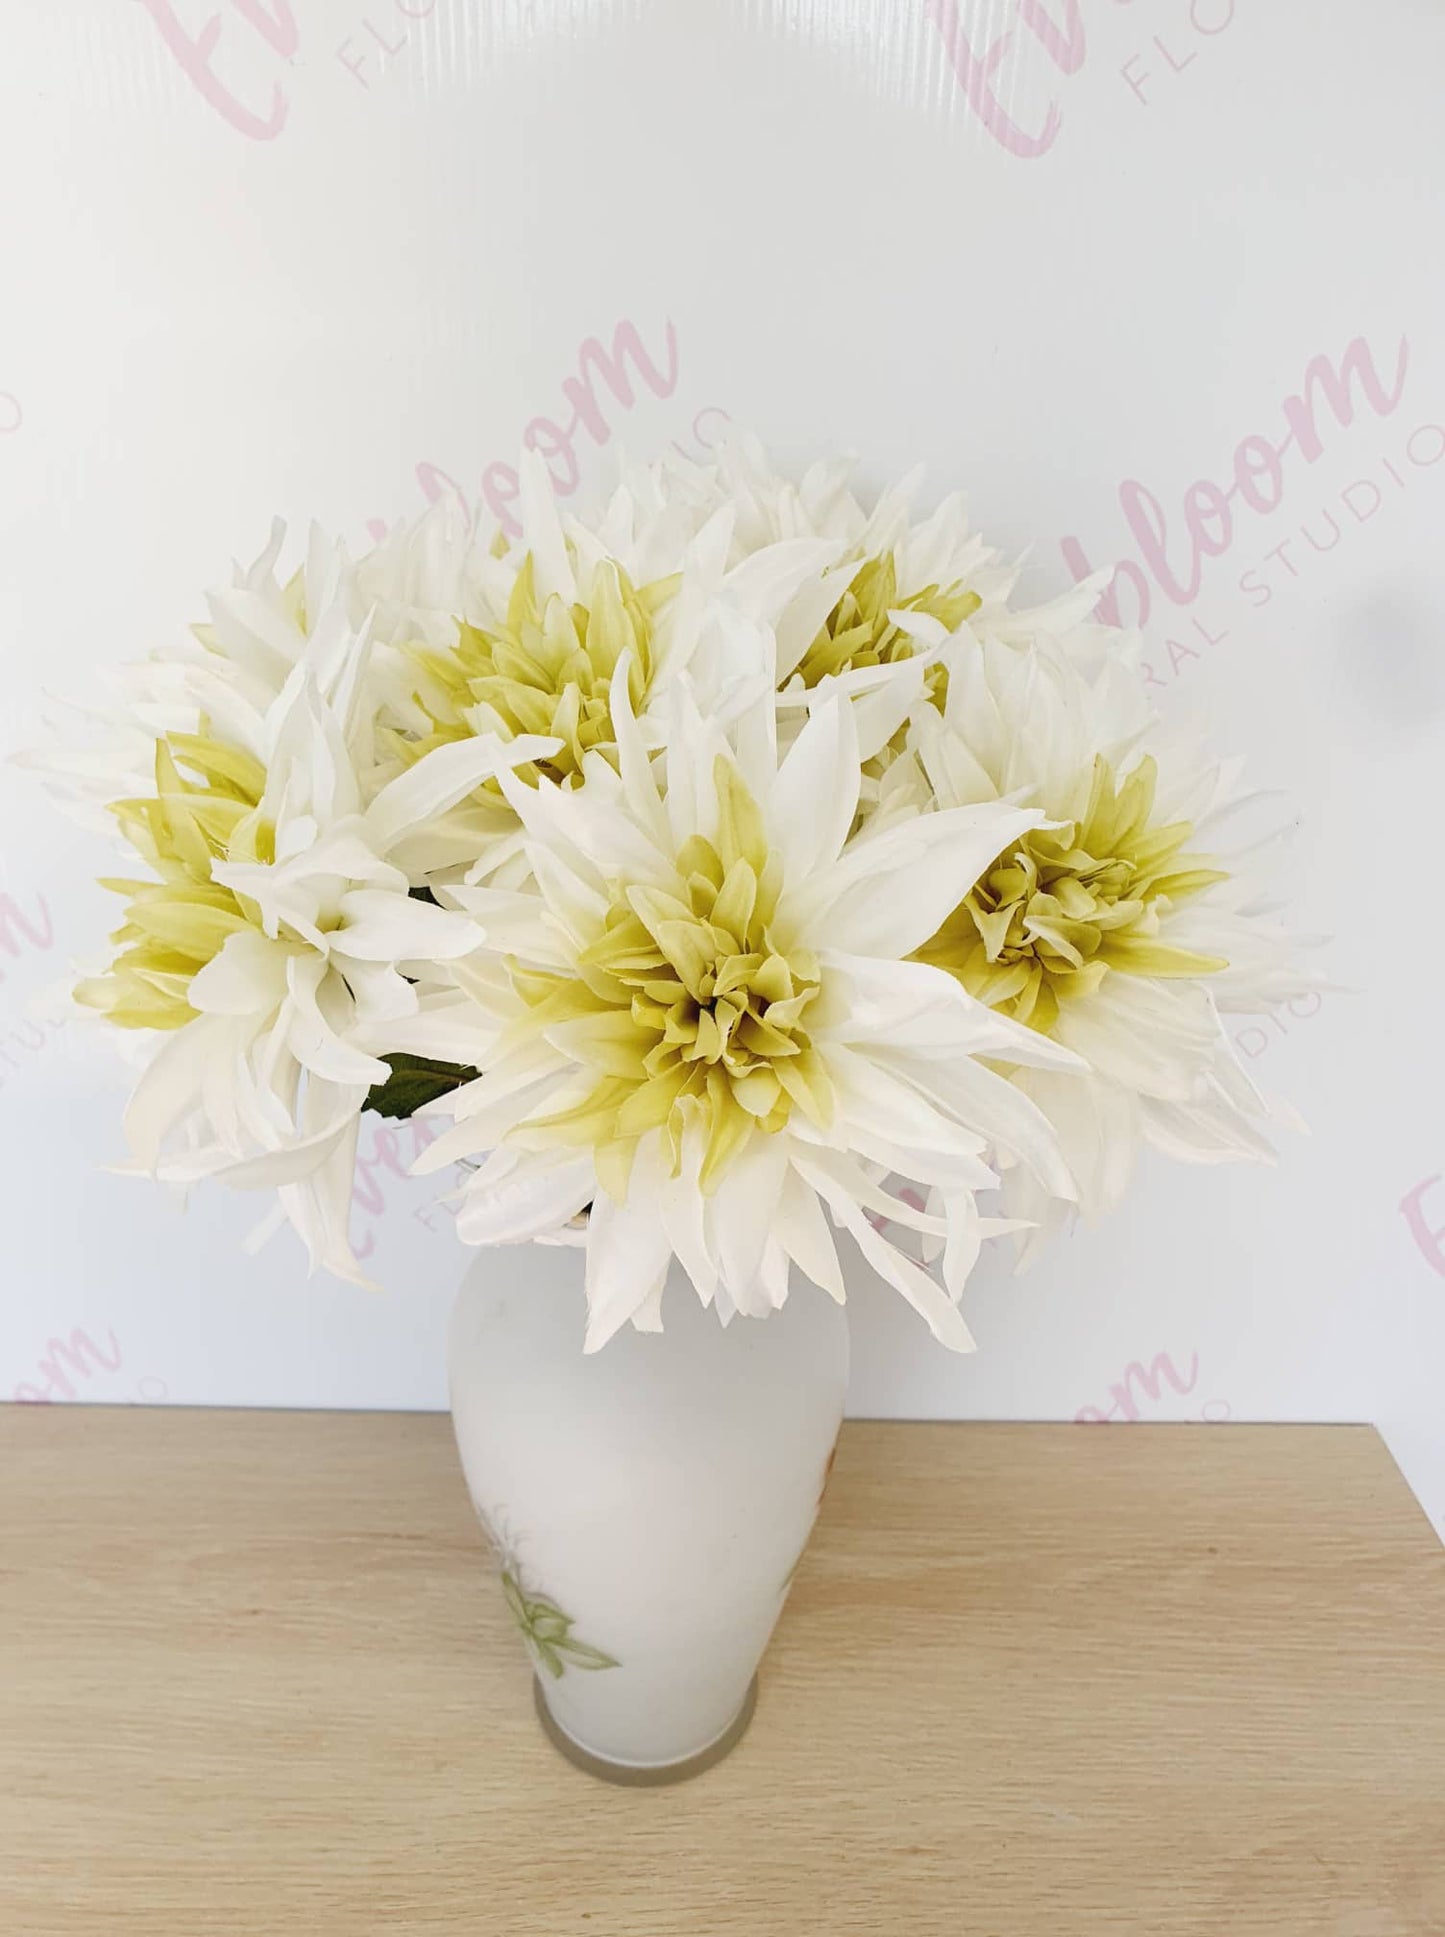 Available now instore at our Mt Maunganui florist studio we have these Amazingly real looking white and green Dahlia's are on our menu and available for single stem purchase. These are such a fave so be in quick before they sell out. We offer same day delivery locally to Mount Maunganui, Papamoa and Tauranga 